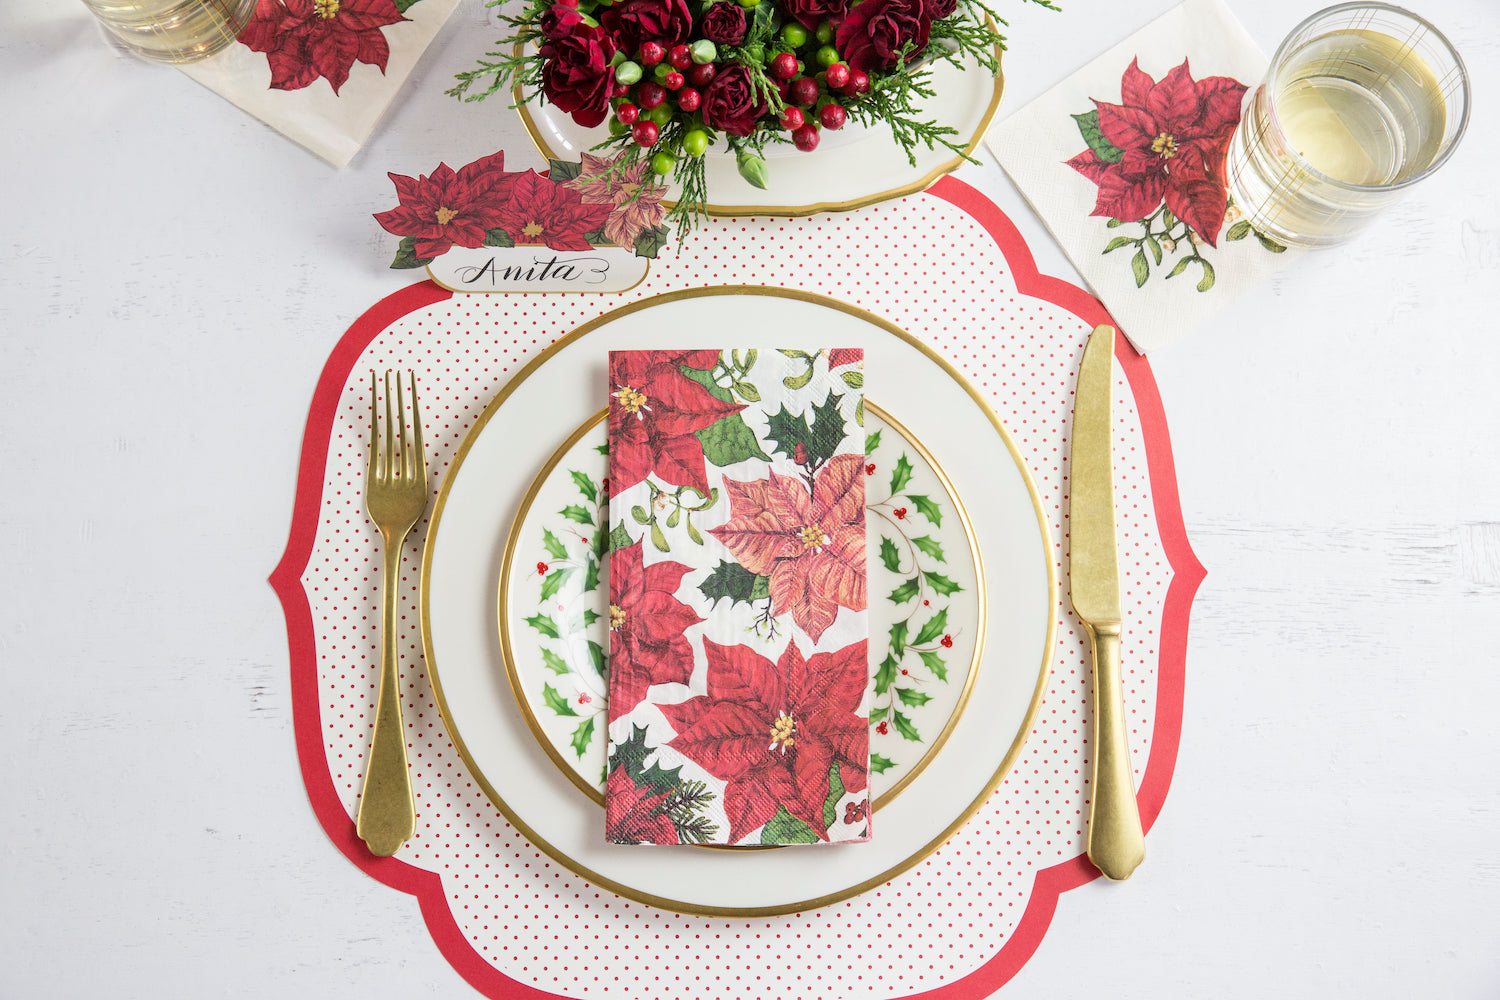 Festive Christmas Die-cut Red Swiss Dot placemats perfect for enhancing your tablescape during the holiday season. Hester &amp; Cook